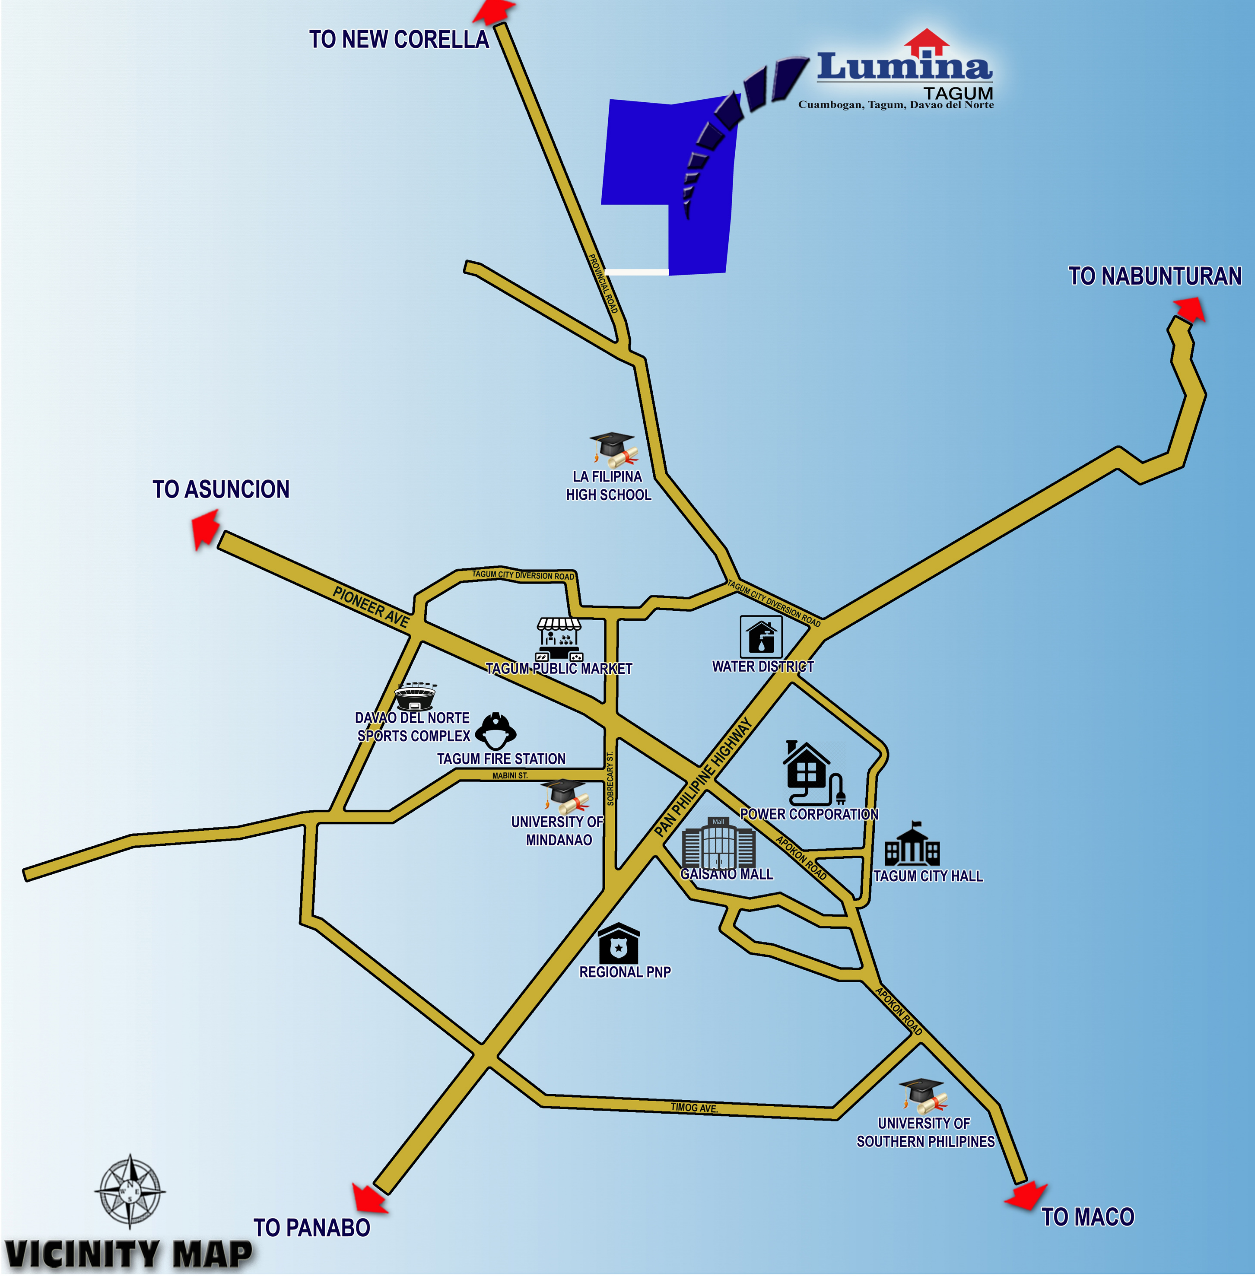 VICINITY-MAP-1635300808.png